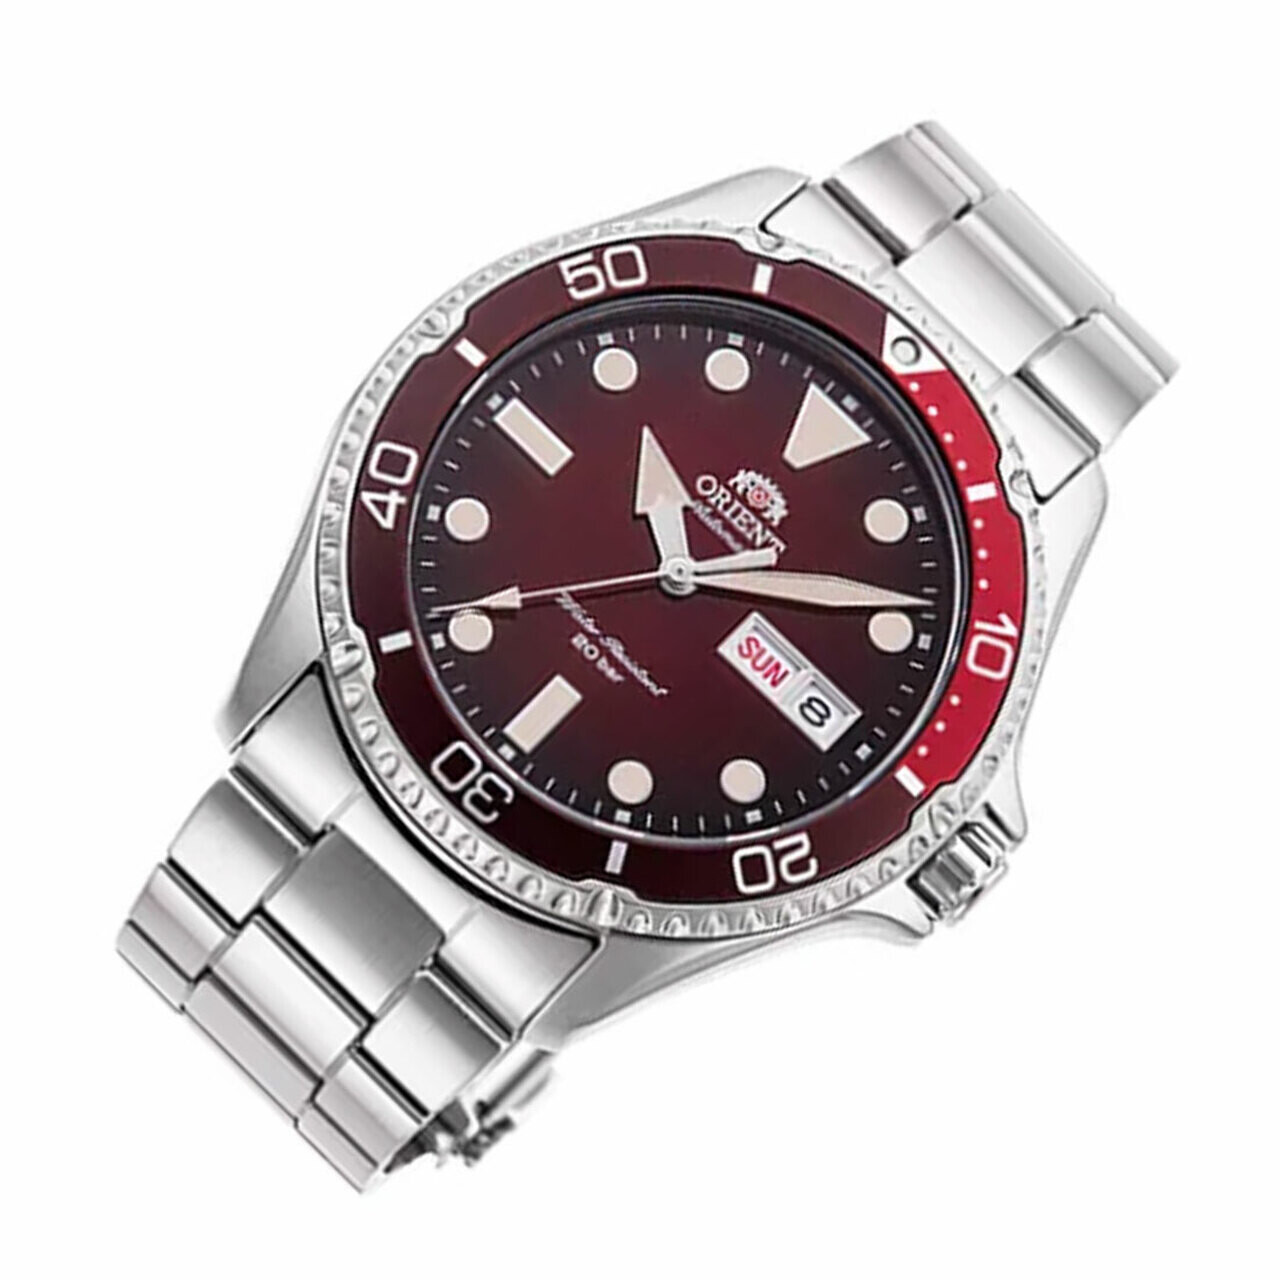 Orient Kamasu RA-AA0814R automatic divers men's watch red dial 41.8mm Sapphire glass 200m water resist stainless steel bracelet